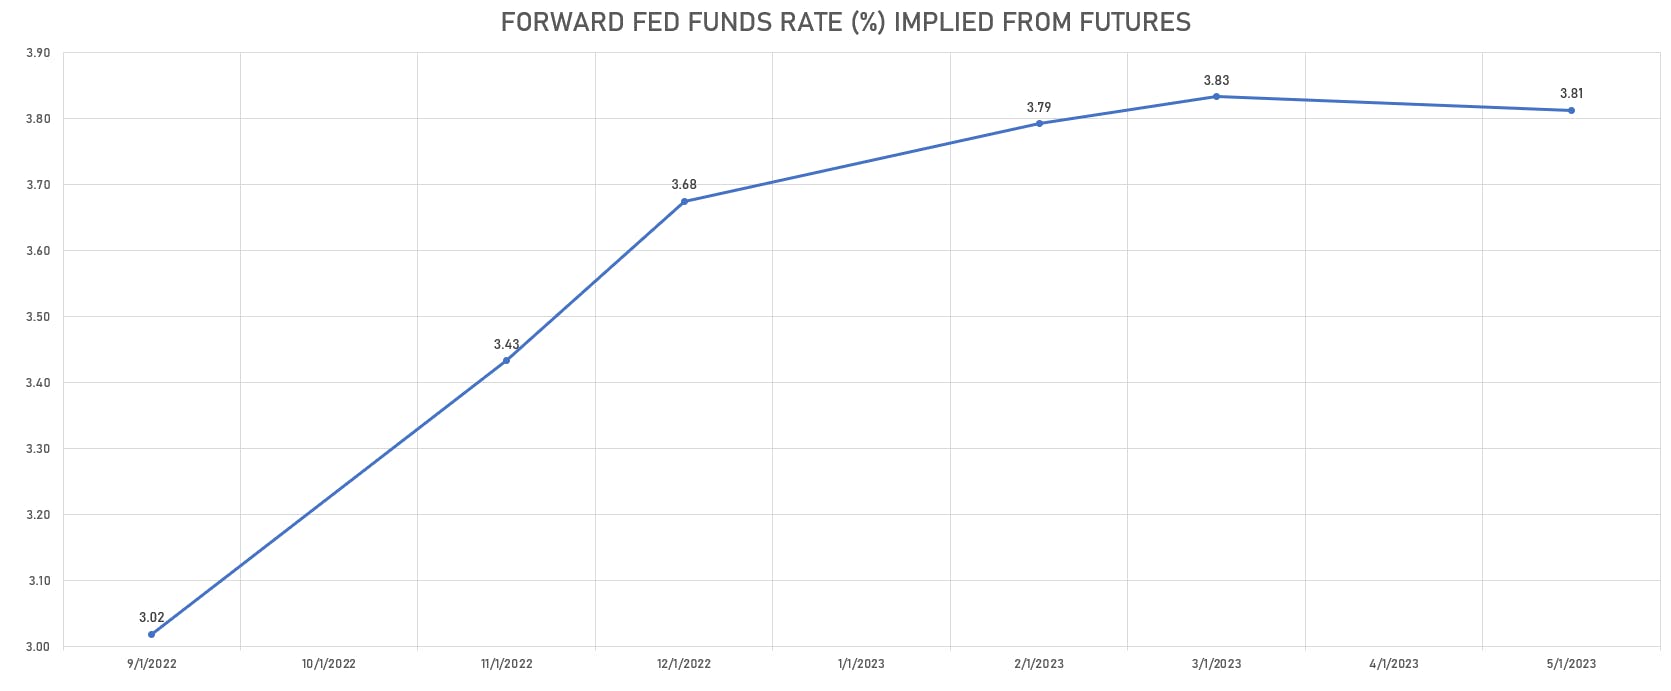 Fed Funds futures implied forward rates | Sources: phipost.com, Refinitiv data